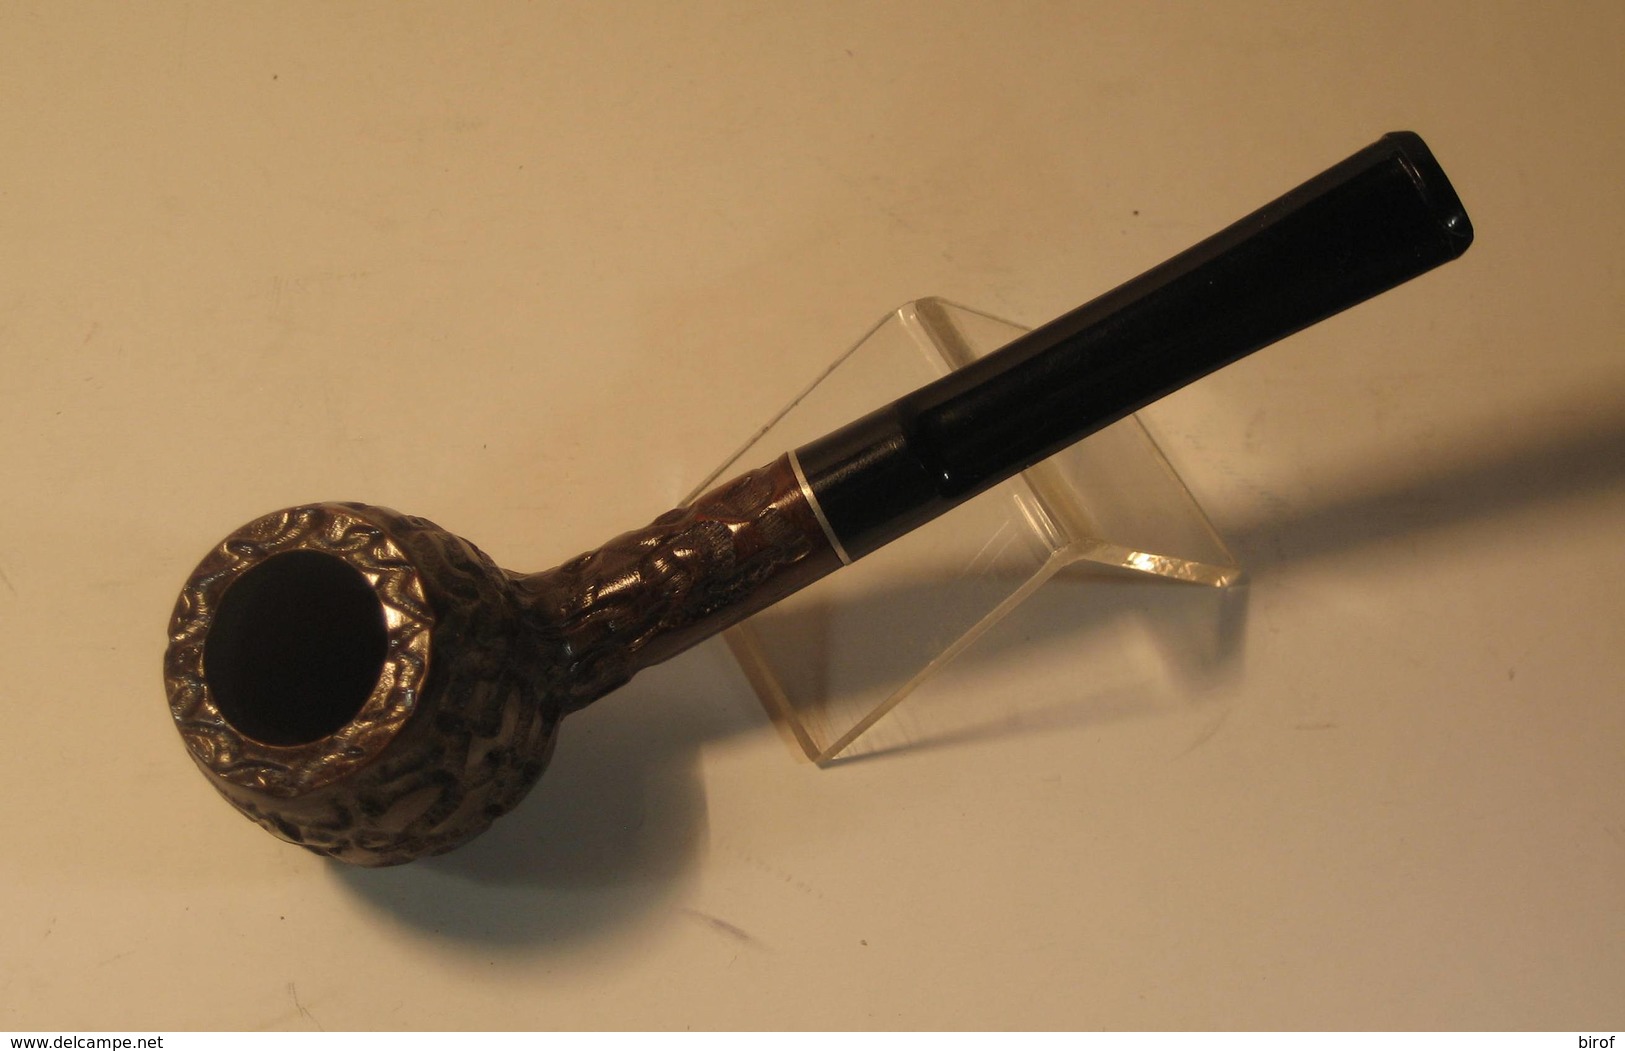 PIPA  - SEFTON  BRIAN FOREIGN - NUOVA   -  - ( N° 19) - Heather Pipes